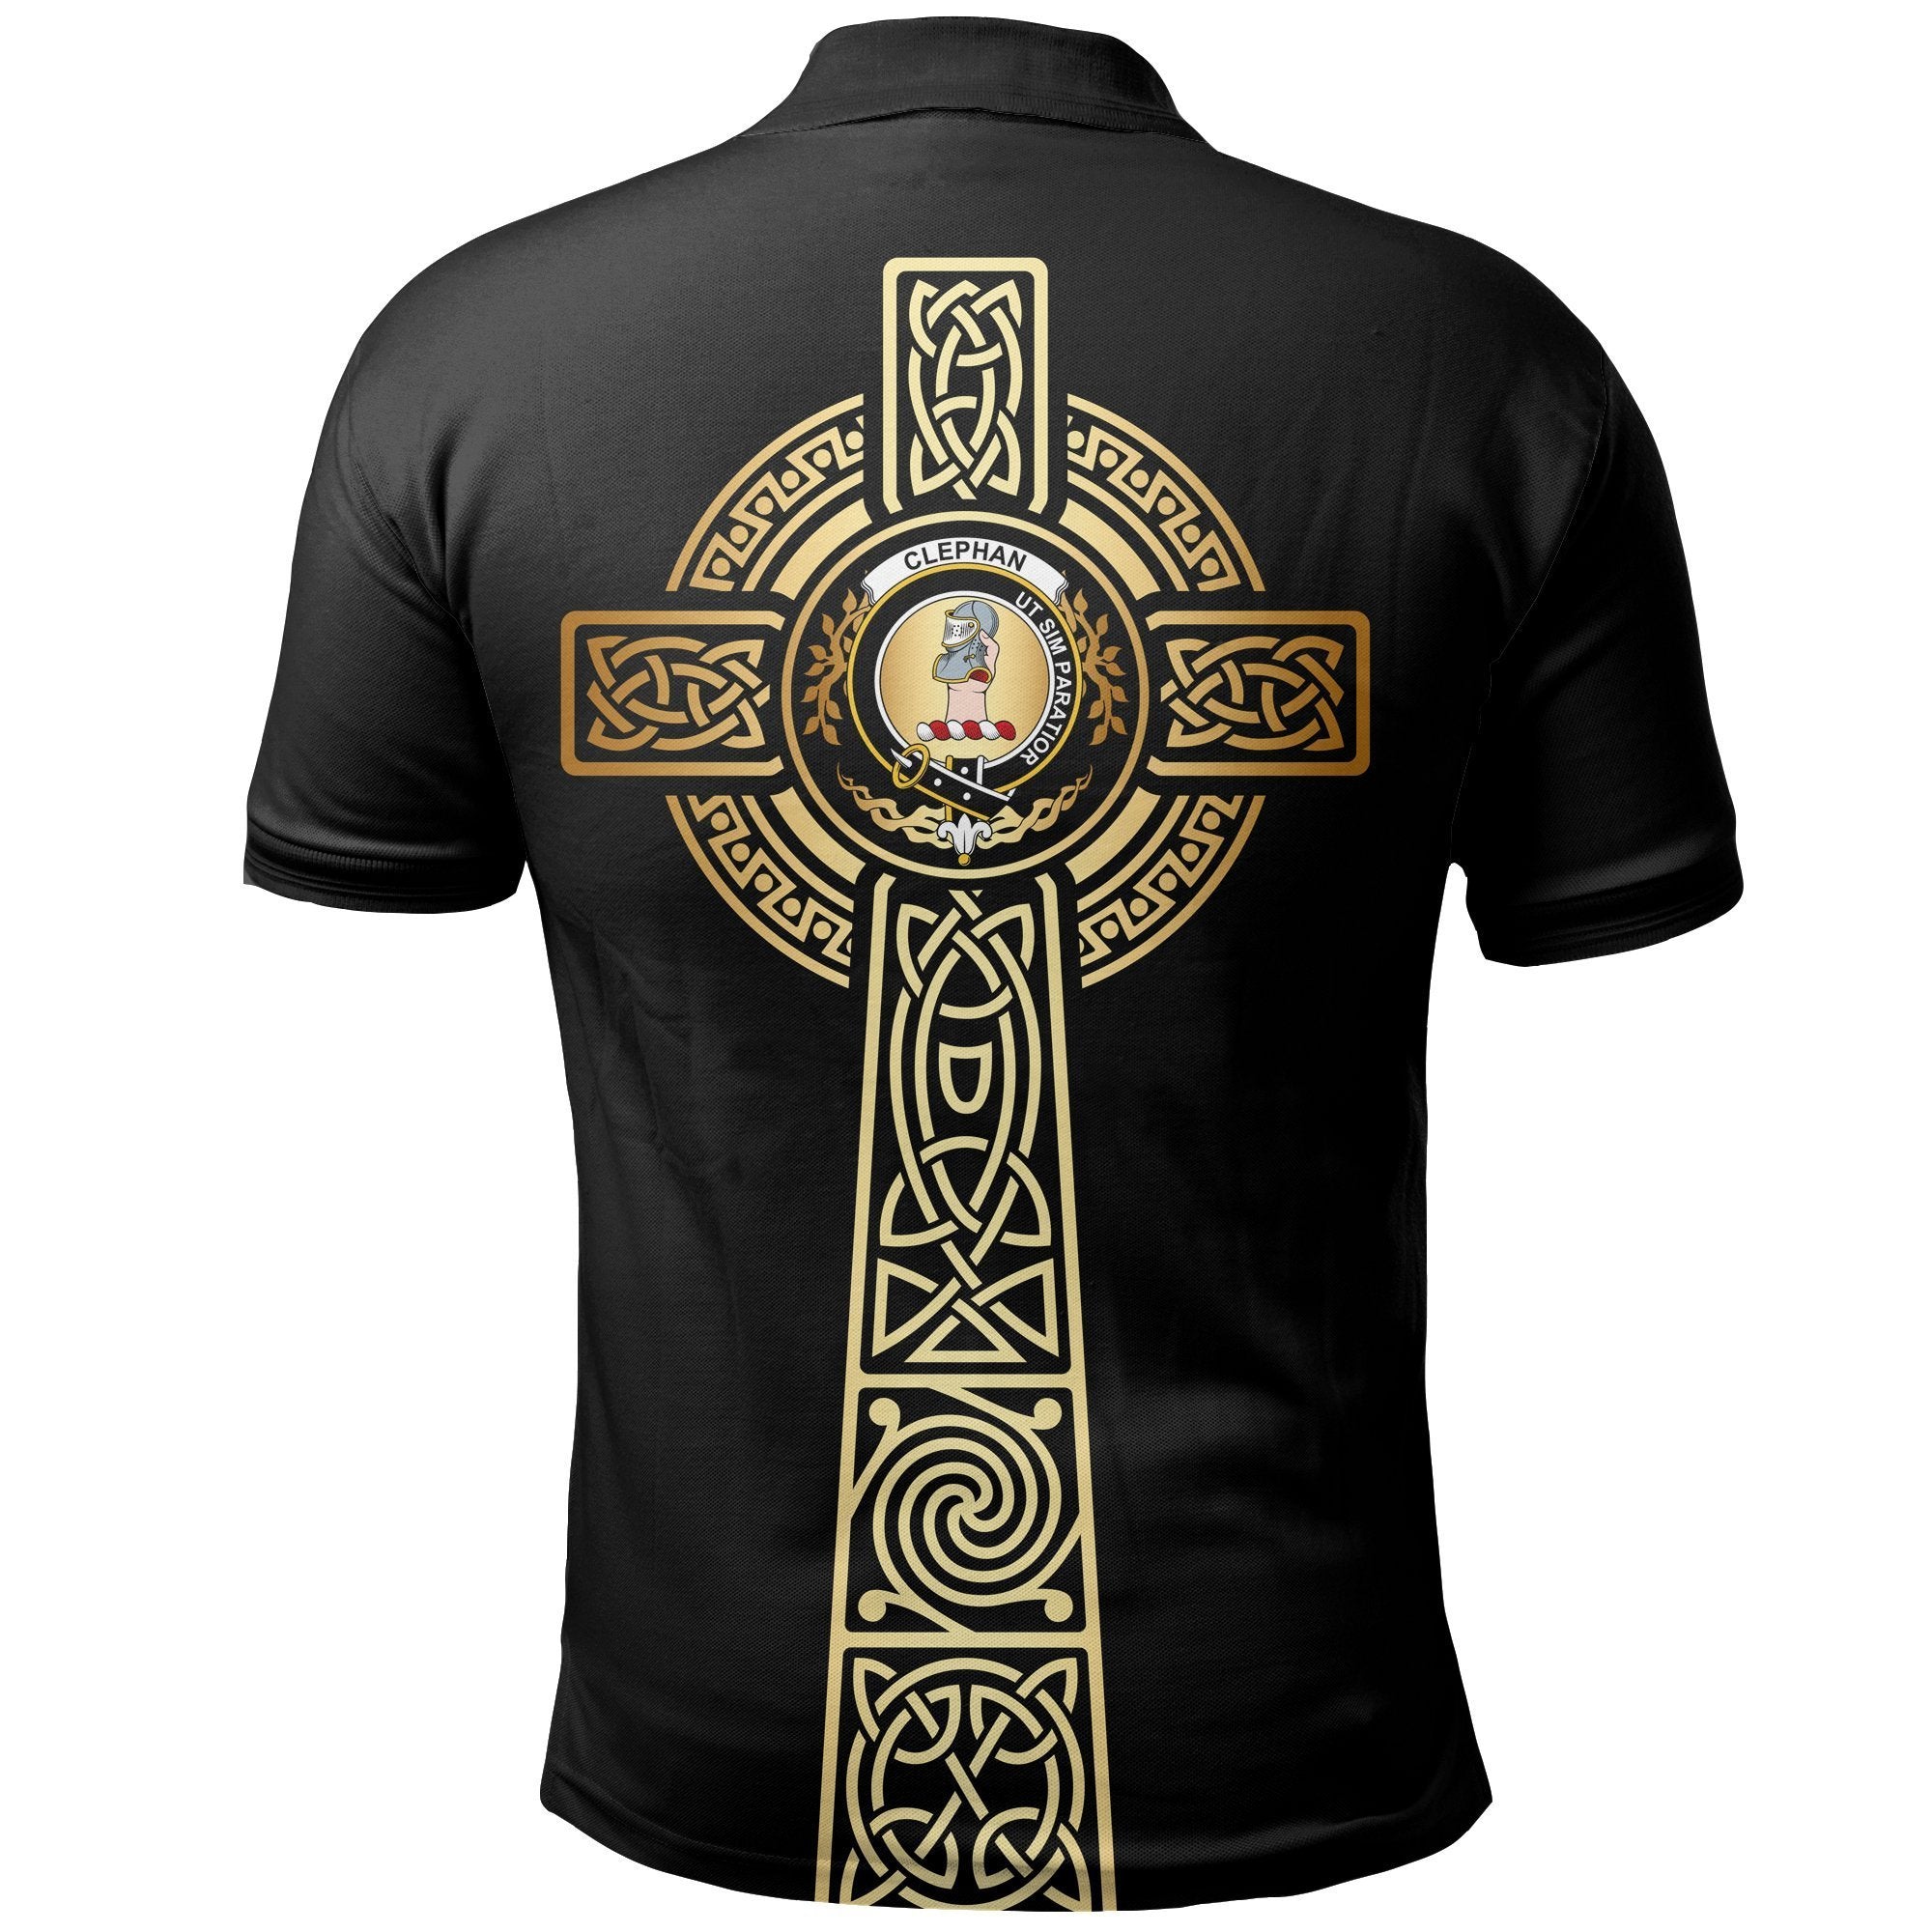 Clephan (or Clephane) Clan Unisex Polo Shirt - Celtic Tree Of Life